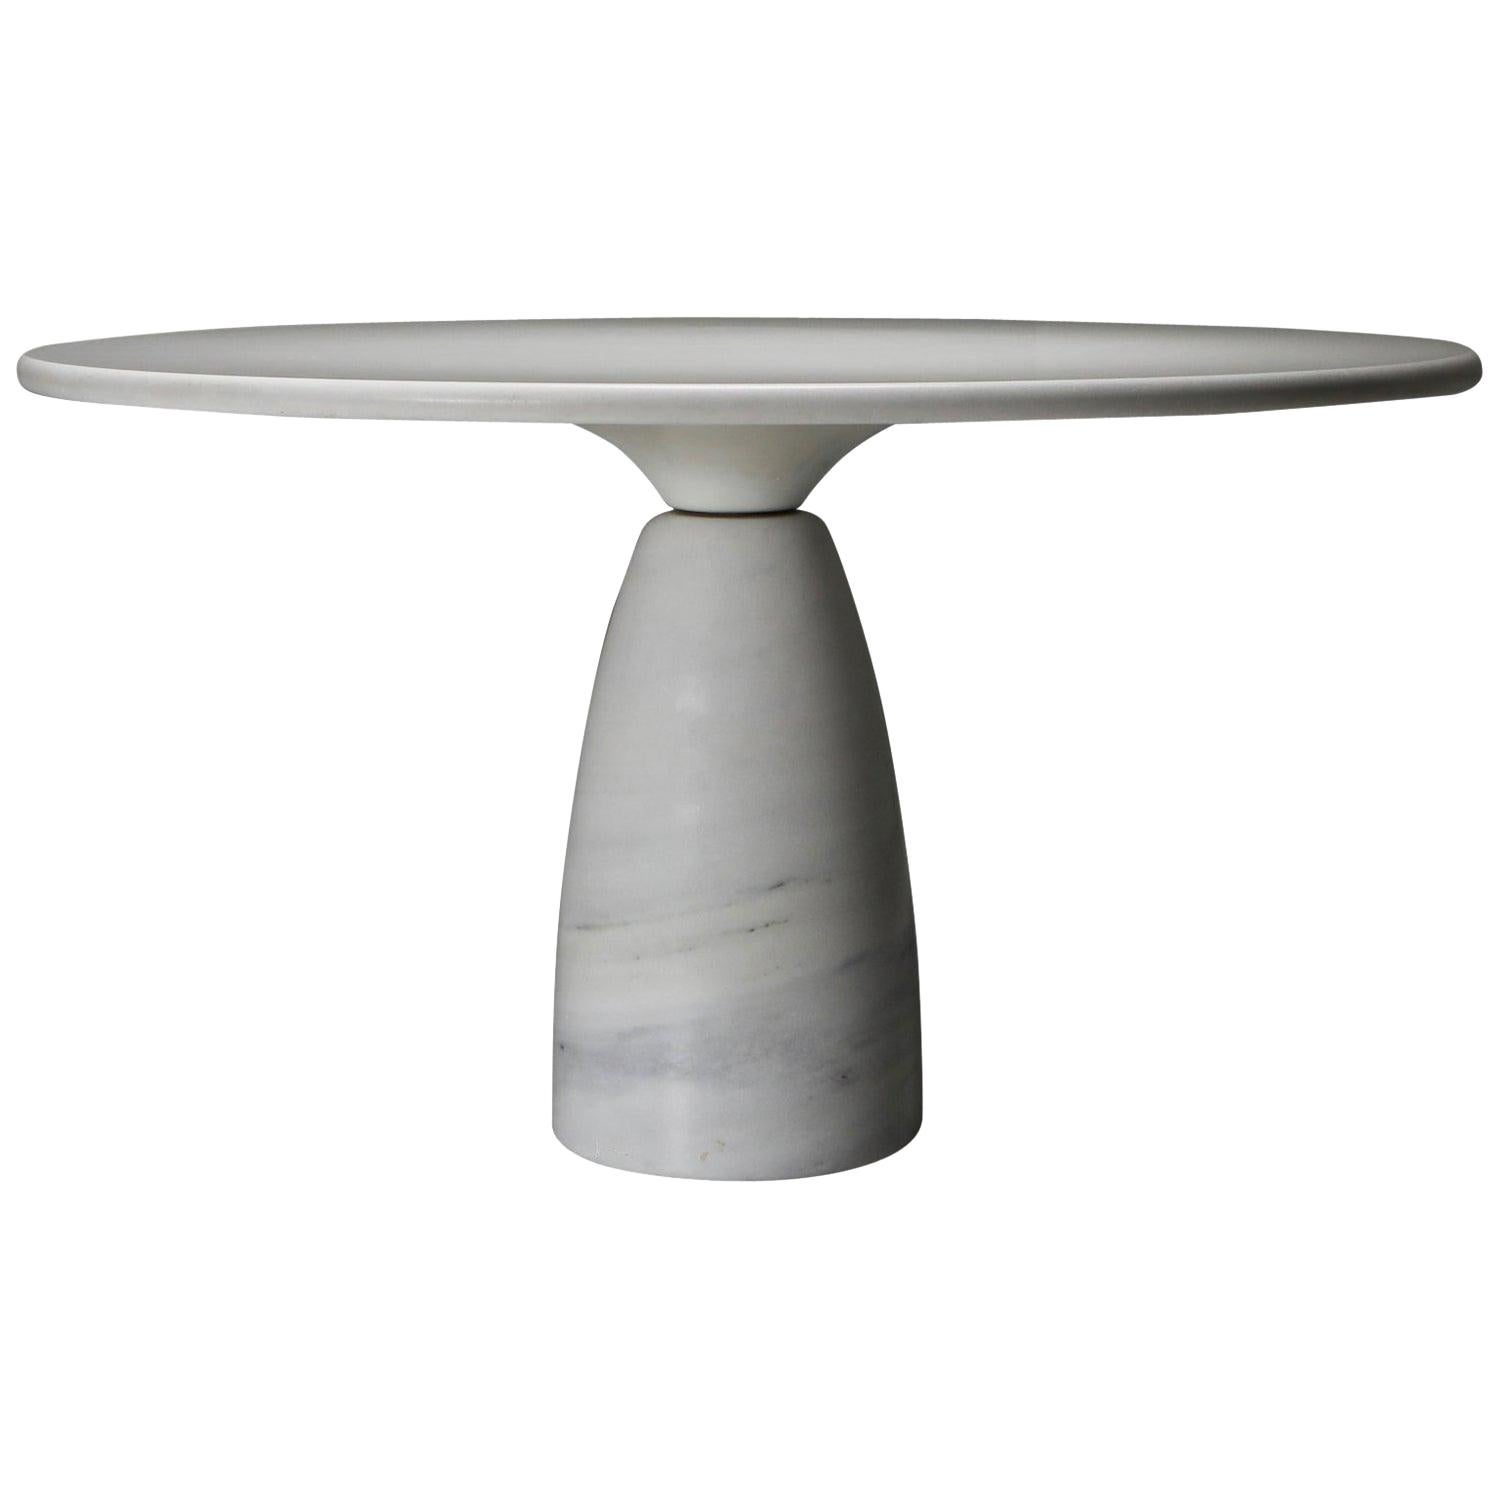 White Calacatta 'Finale' Marble Dining Table by Peter Draenhert